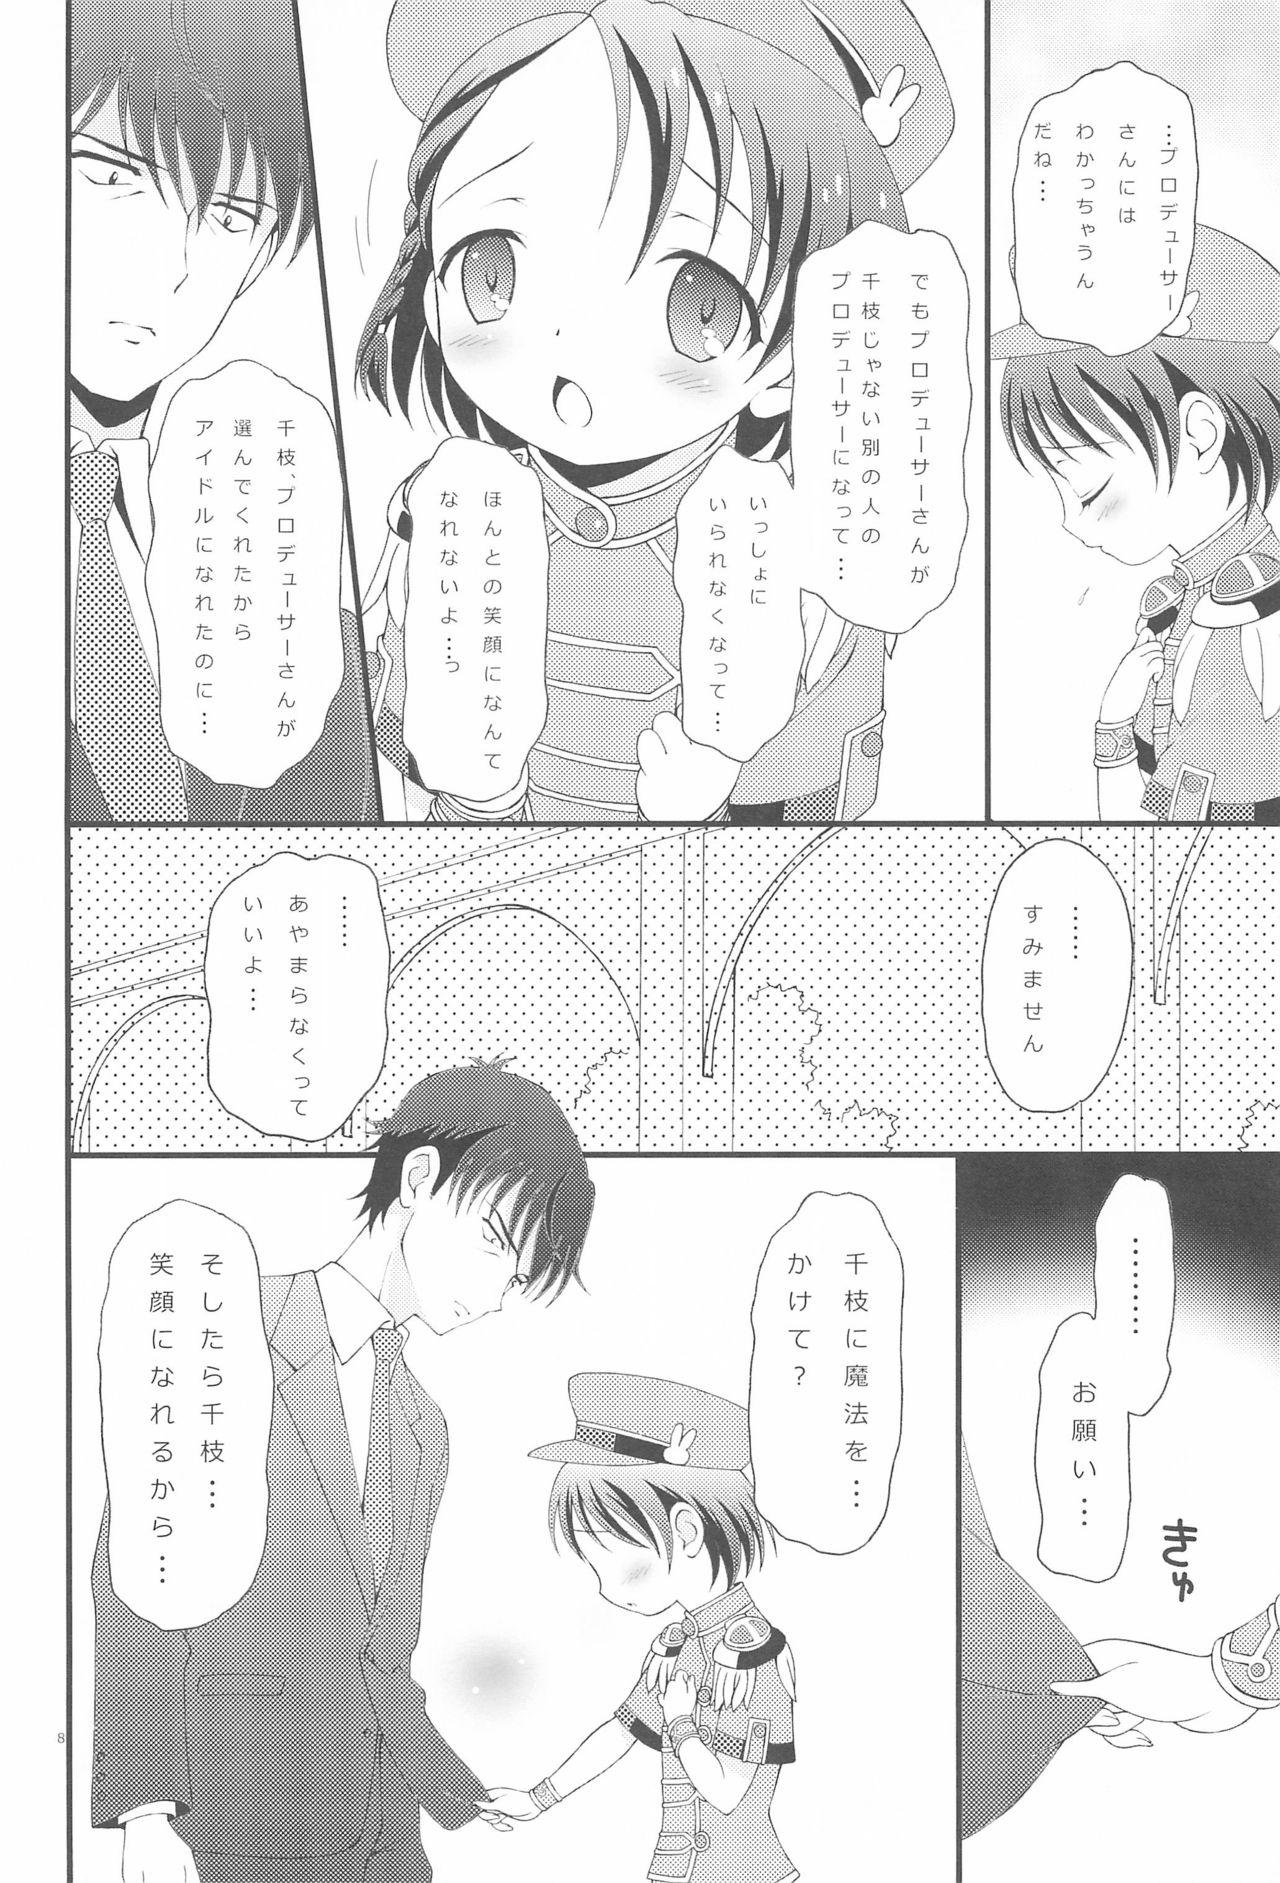 Fuck iXam@s+1 - The idolmaster Perverted - Page 8